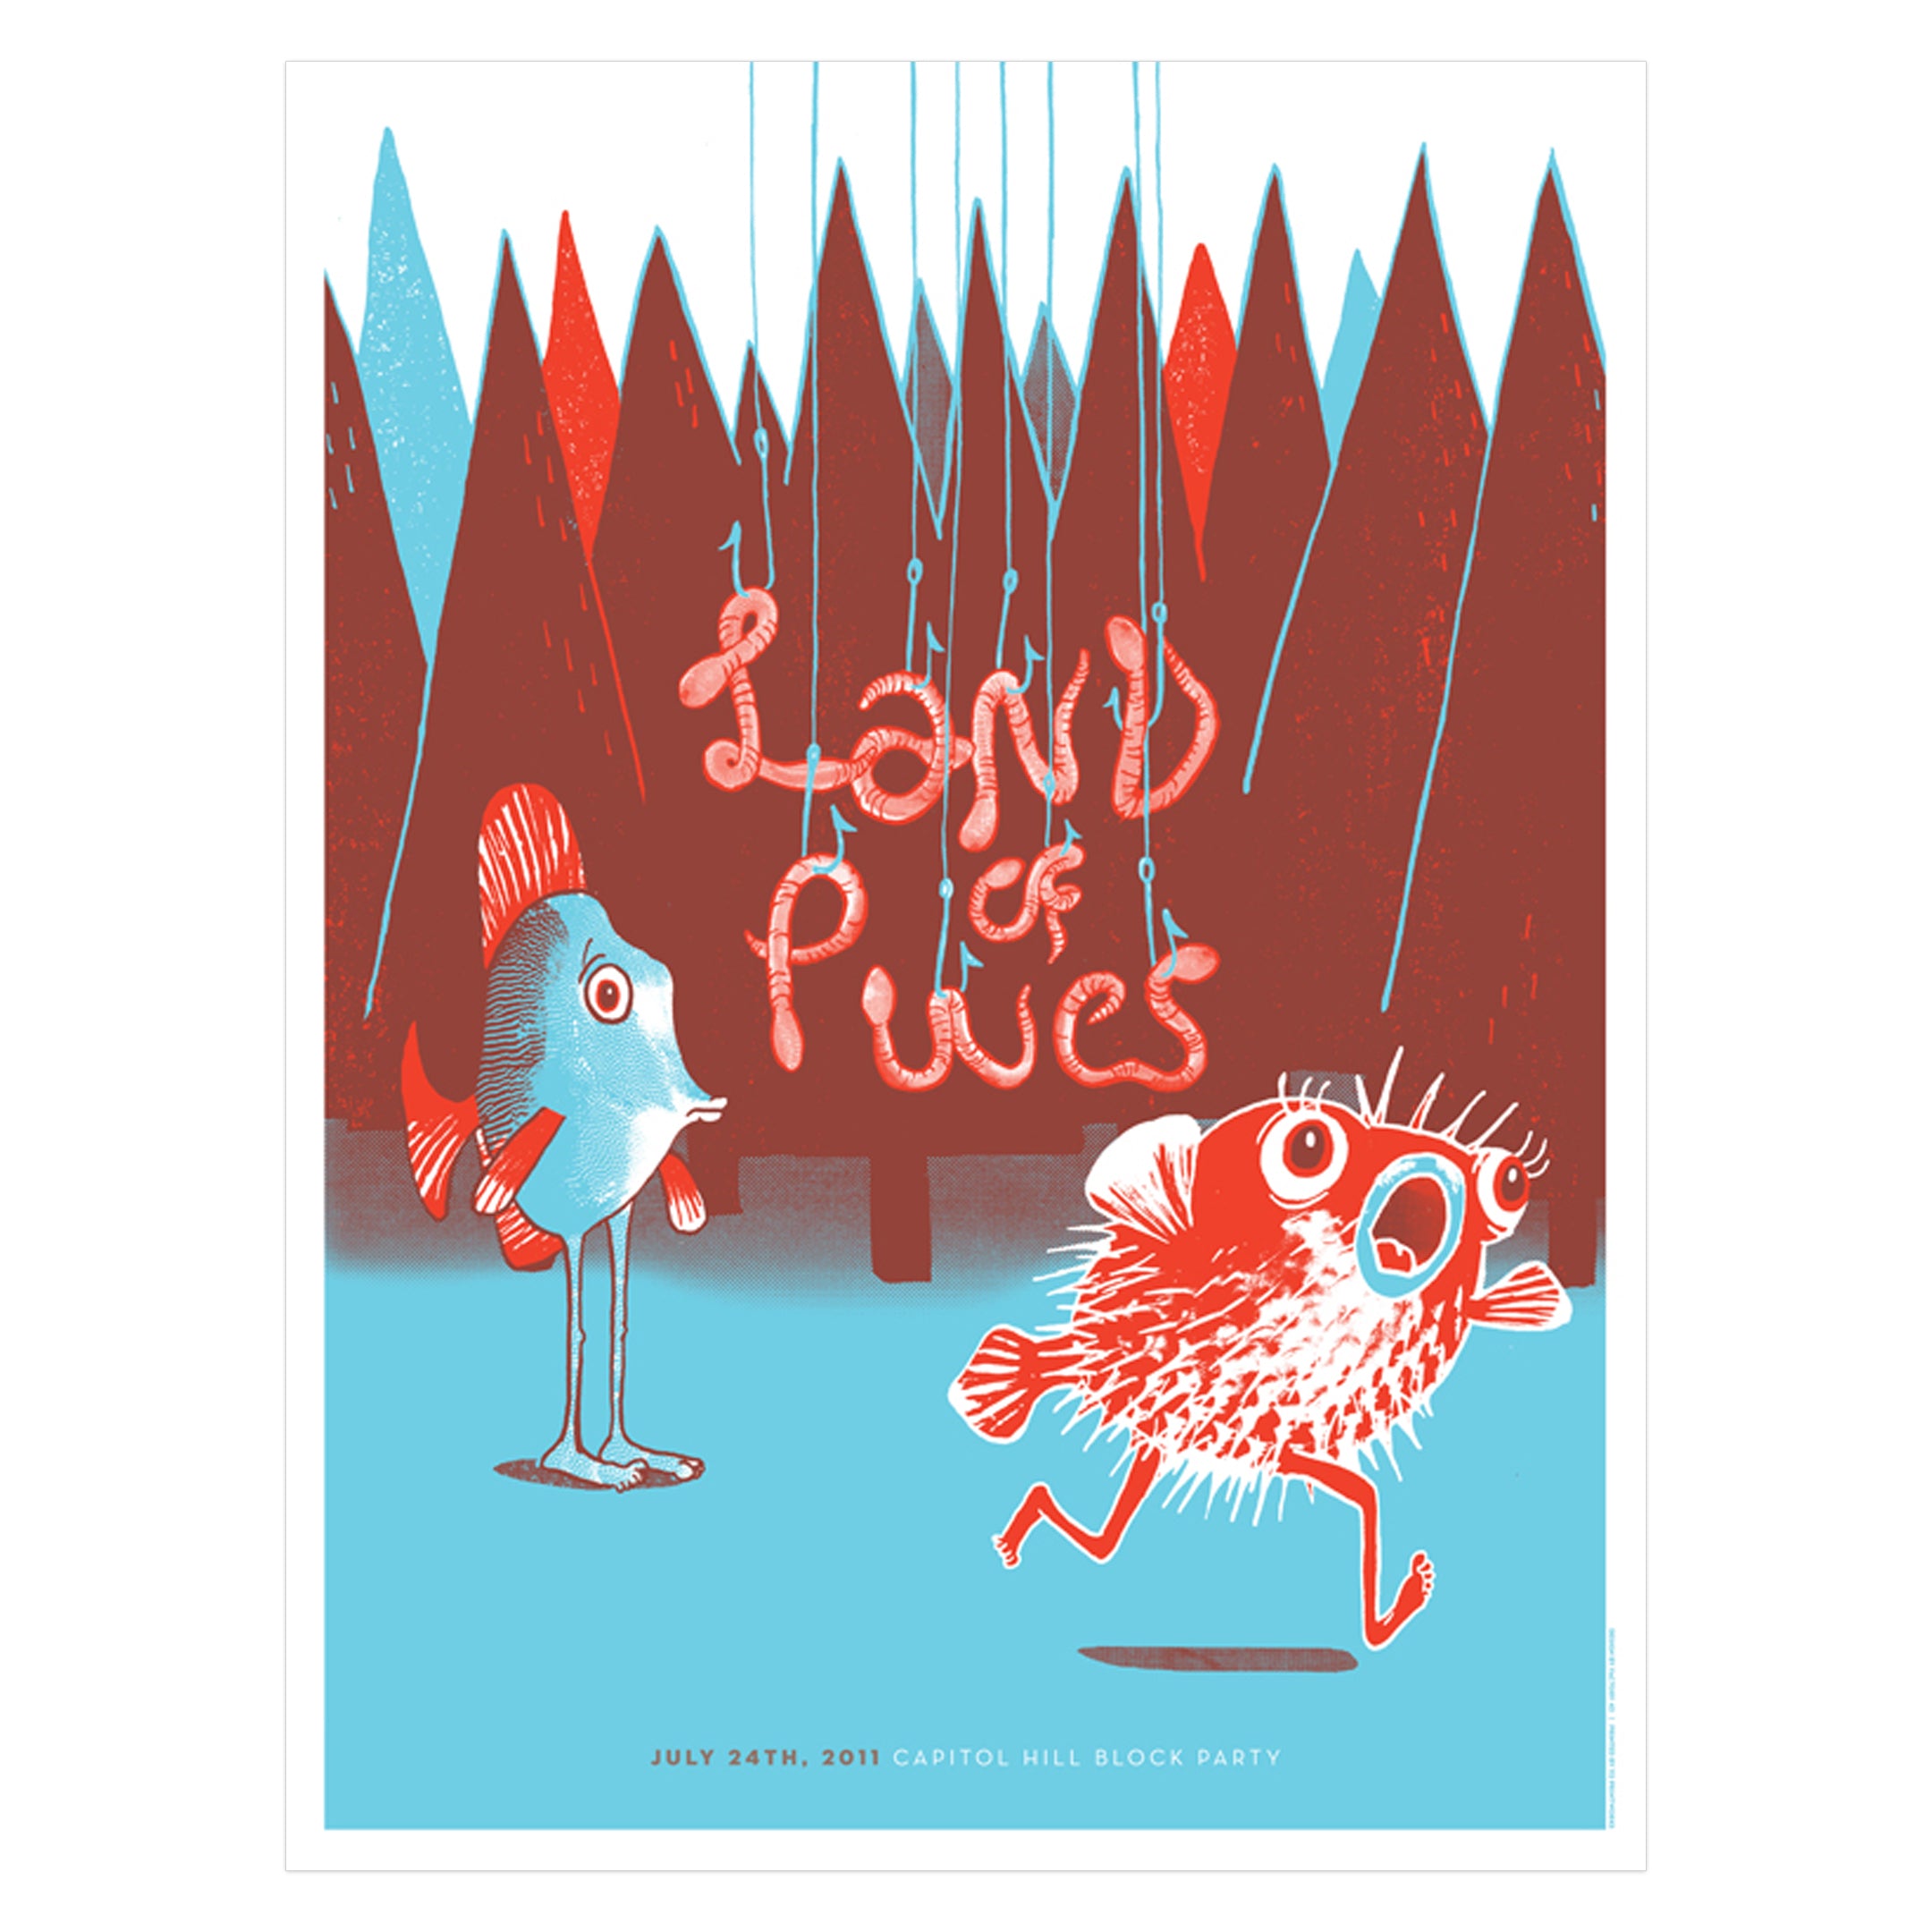 Land of Pines Poster